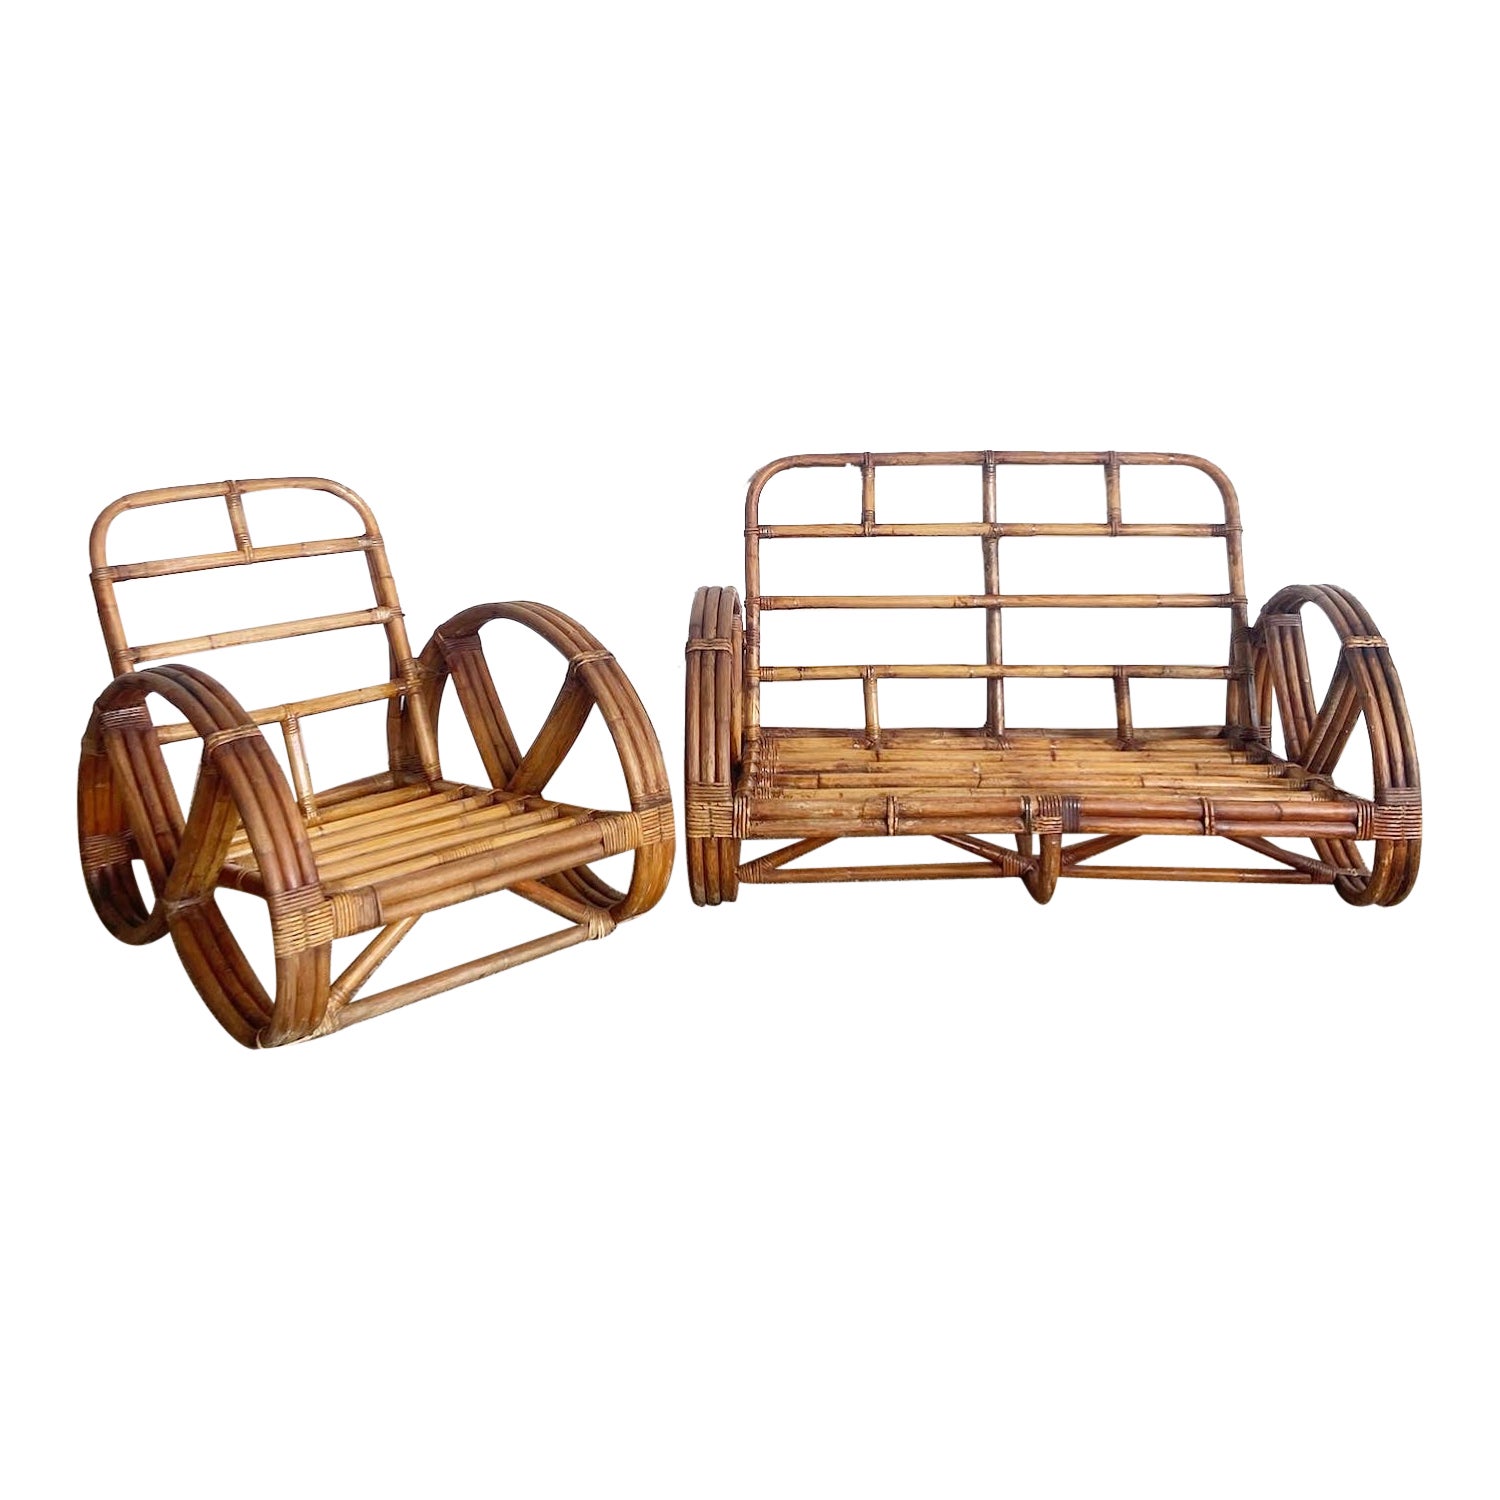 Boho Chic Three Strand Rattan Pretzel Sofa and Chair After Frankl -2 Pieces For Sale